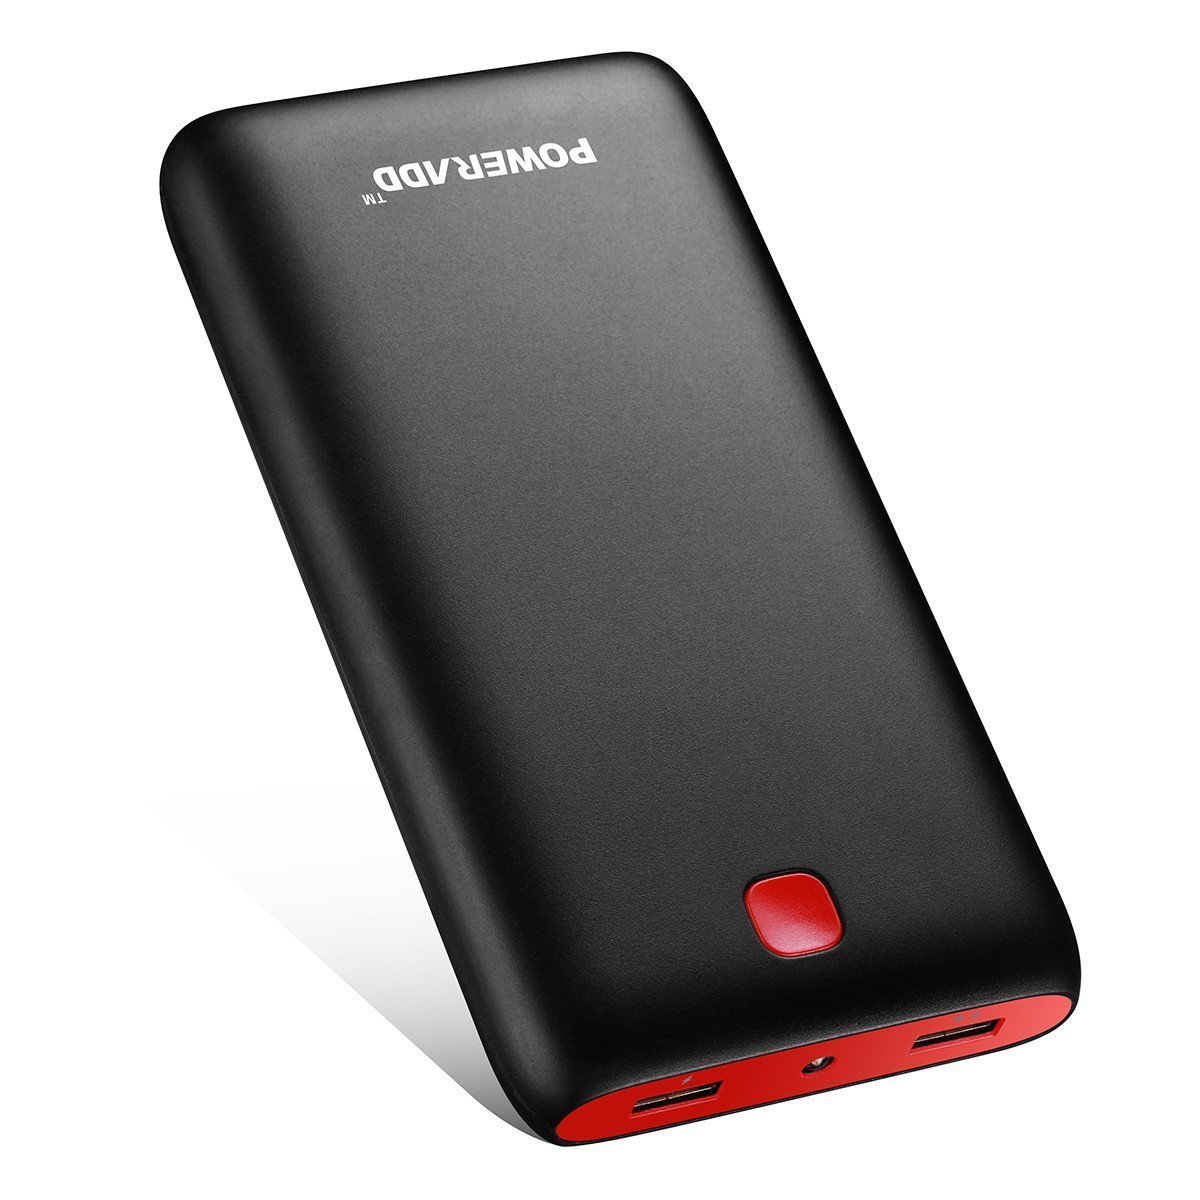 Today only: Poweradd Pilot X7 20000mAh power bank for $17